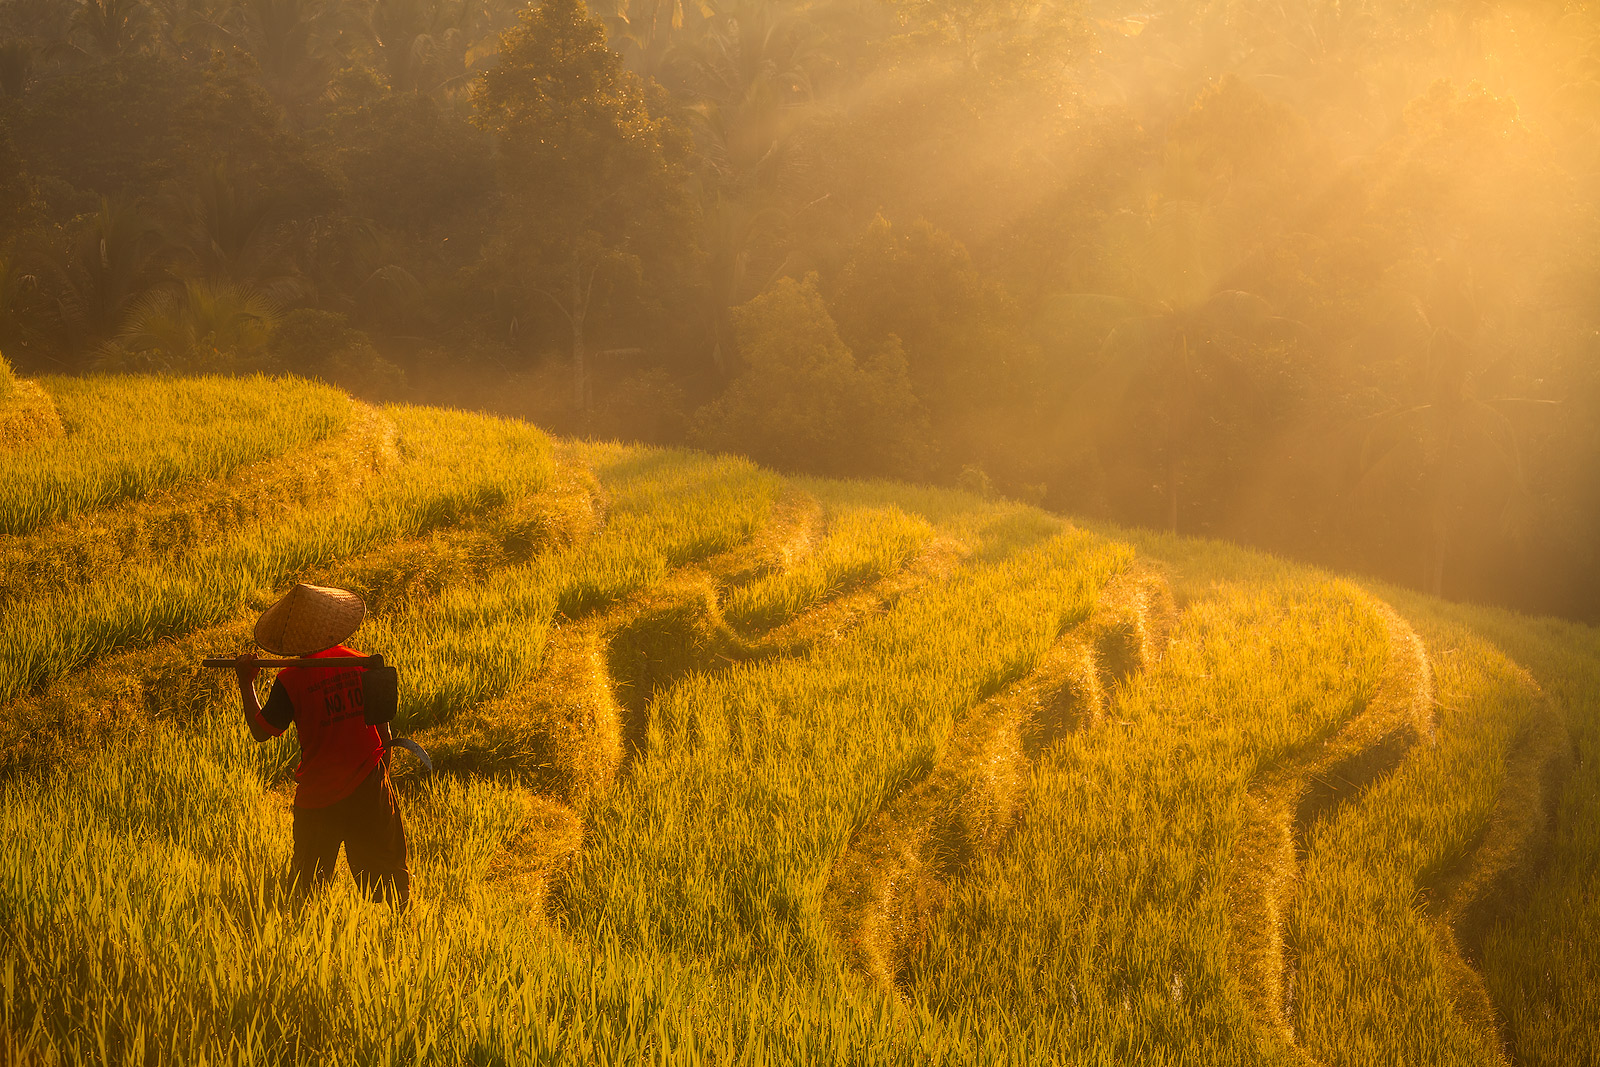 A rice farmer takes a short break to admire the morning light beams coming through the trees.